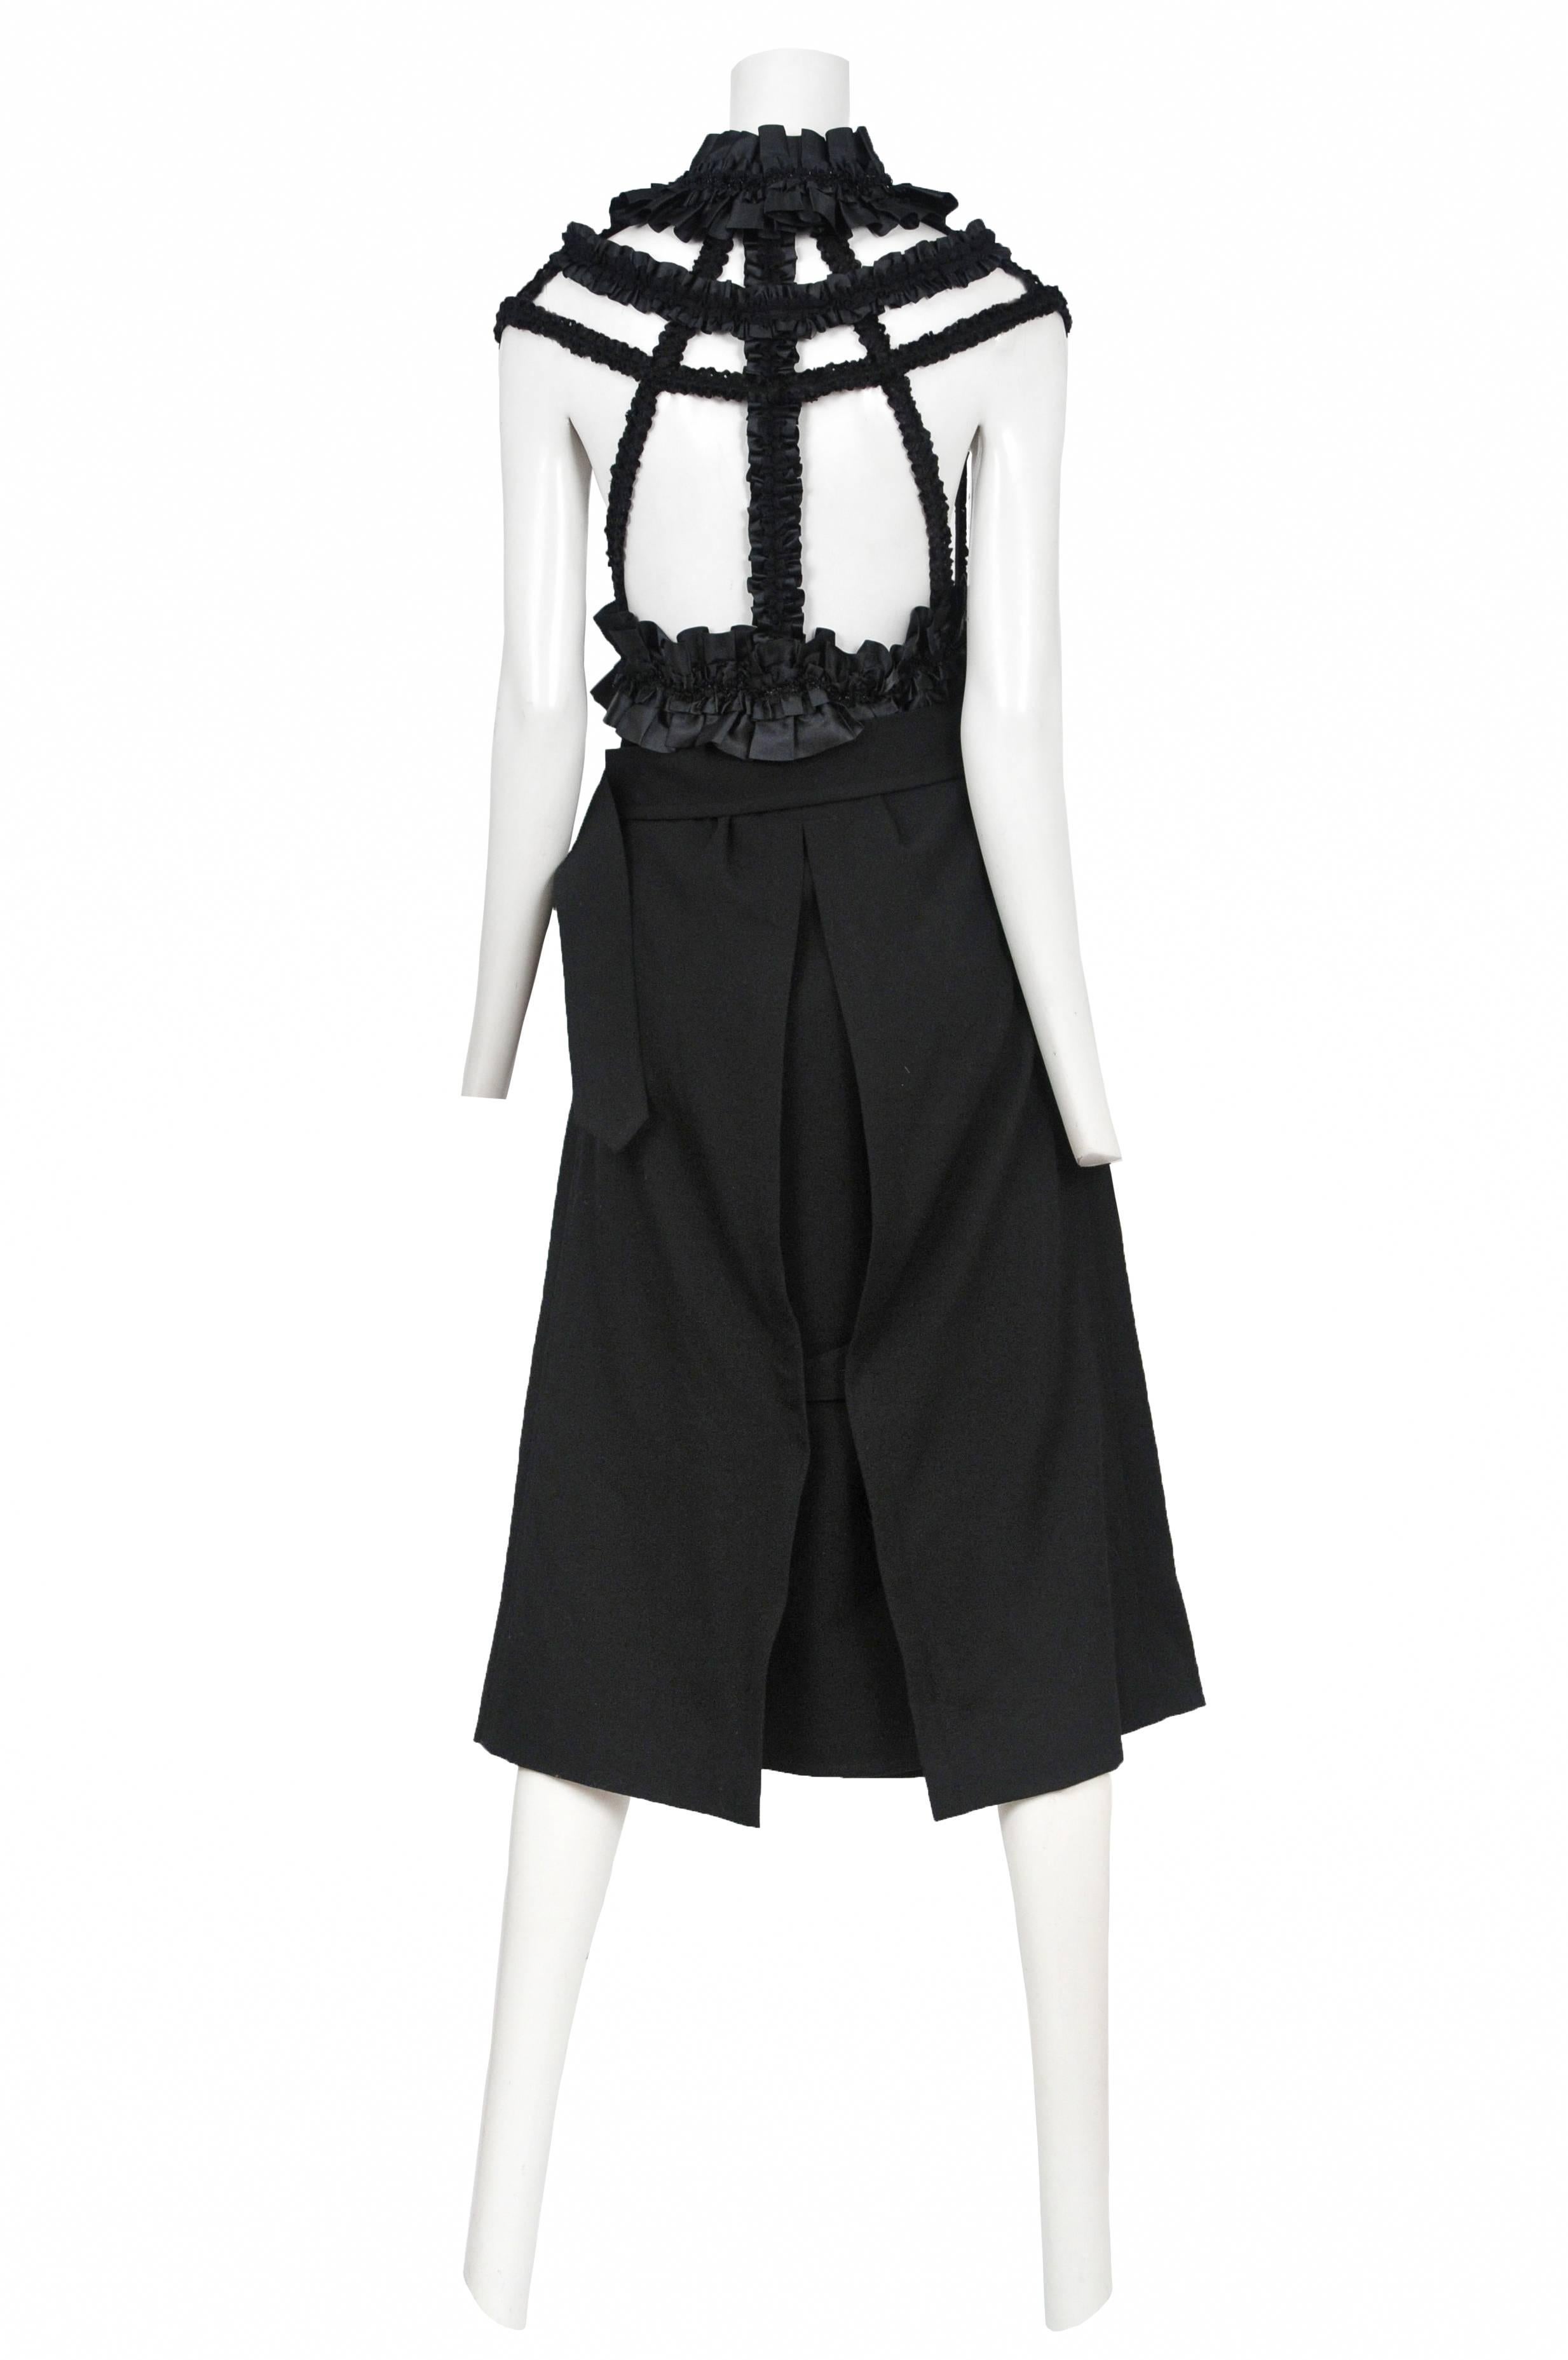 Vintage Comme des Garcons black ribbon harness dress featuring black satin ribbon gathered at harness, neck, and waist band and attaches to a faux double breasted mid length skirt. Circa 2008. 